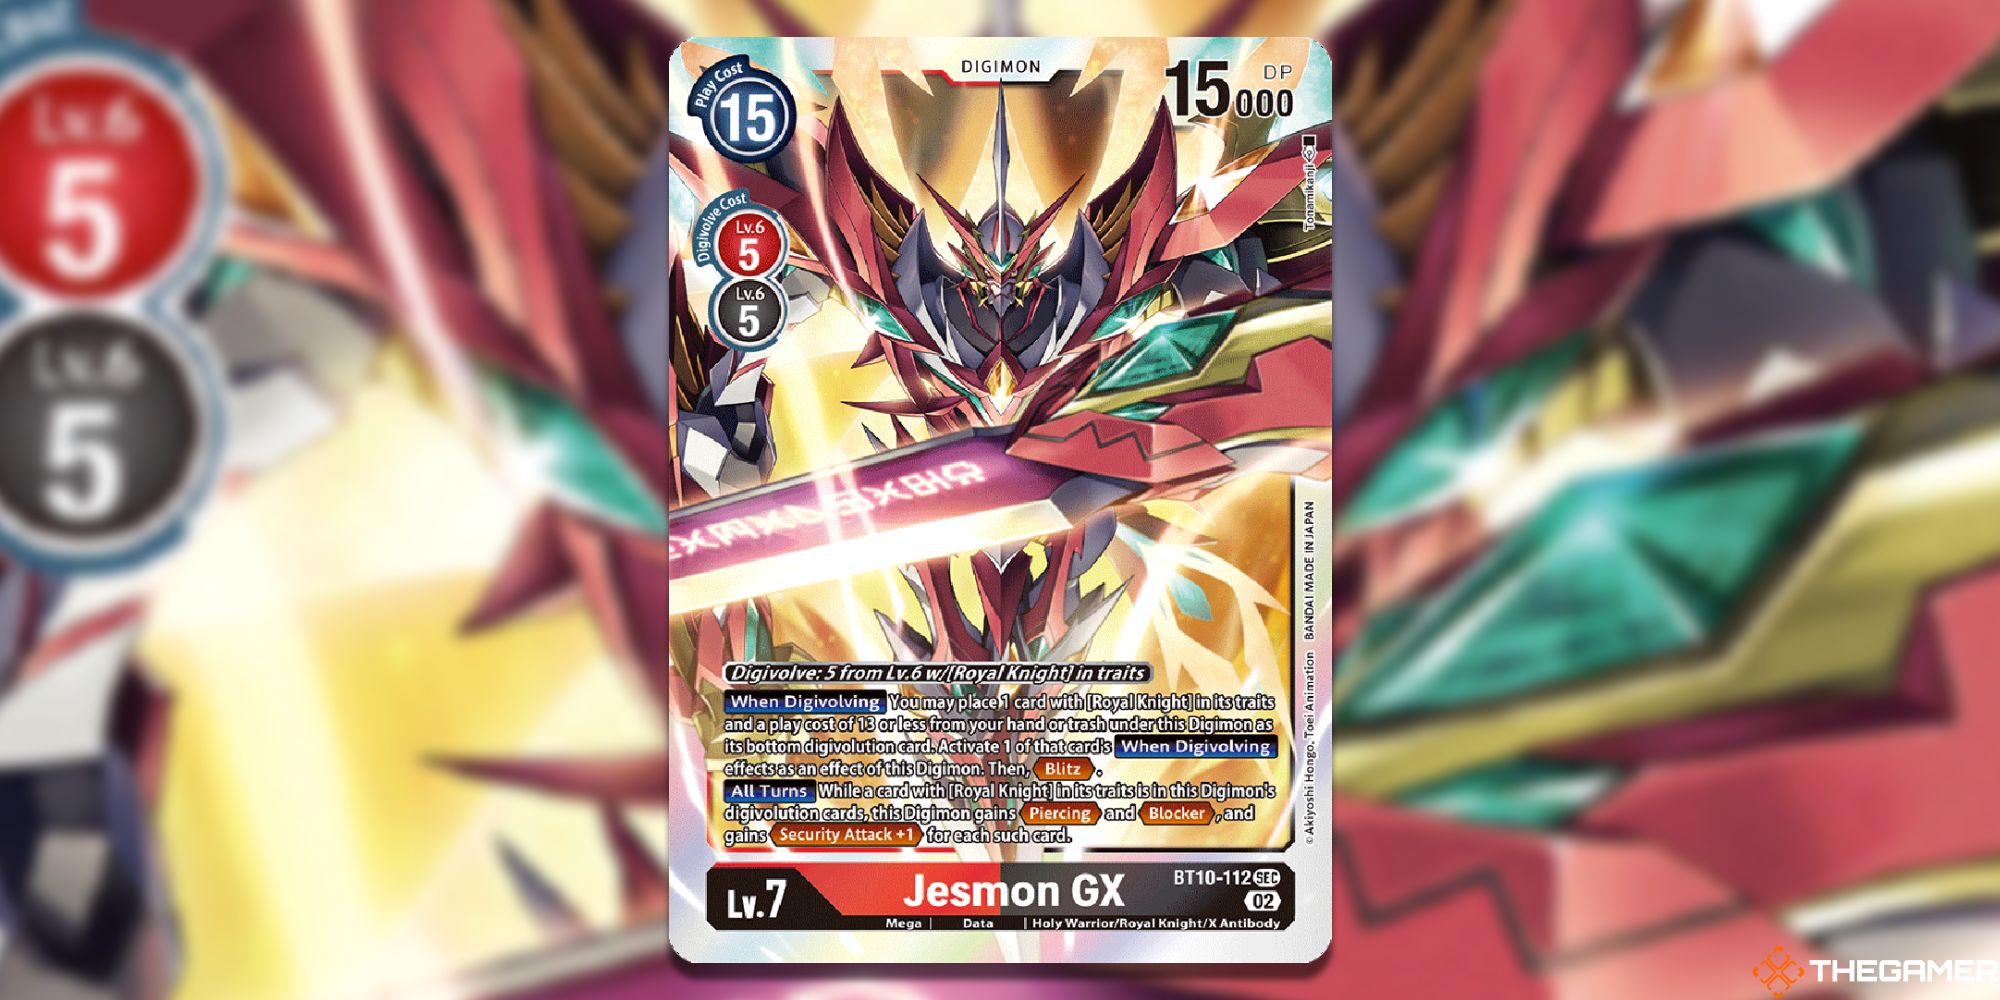 jesmon GX card from digimon card game with blur background